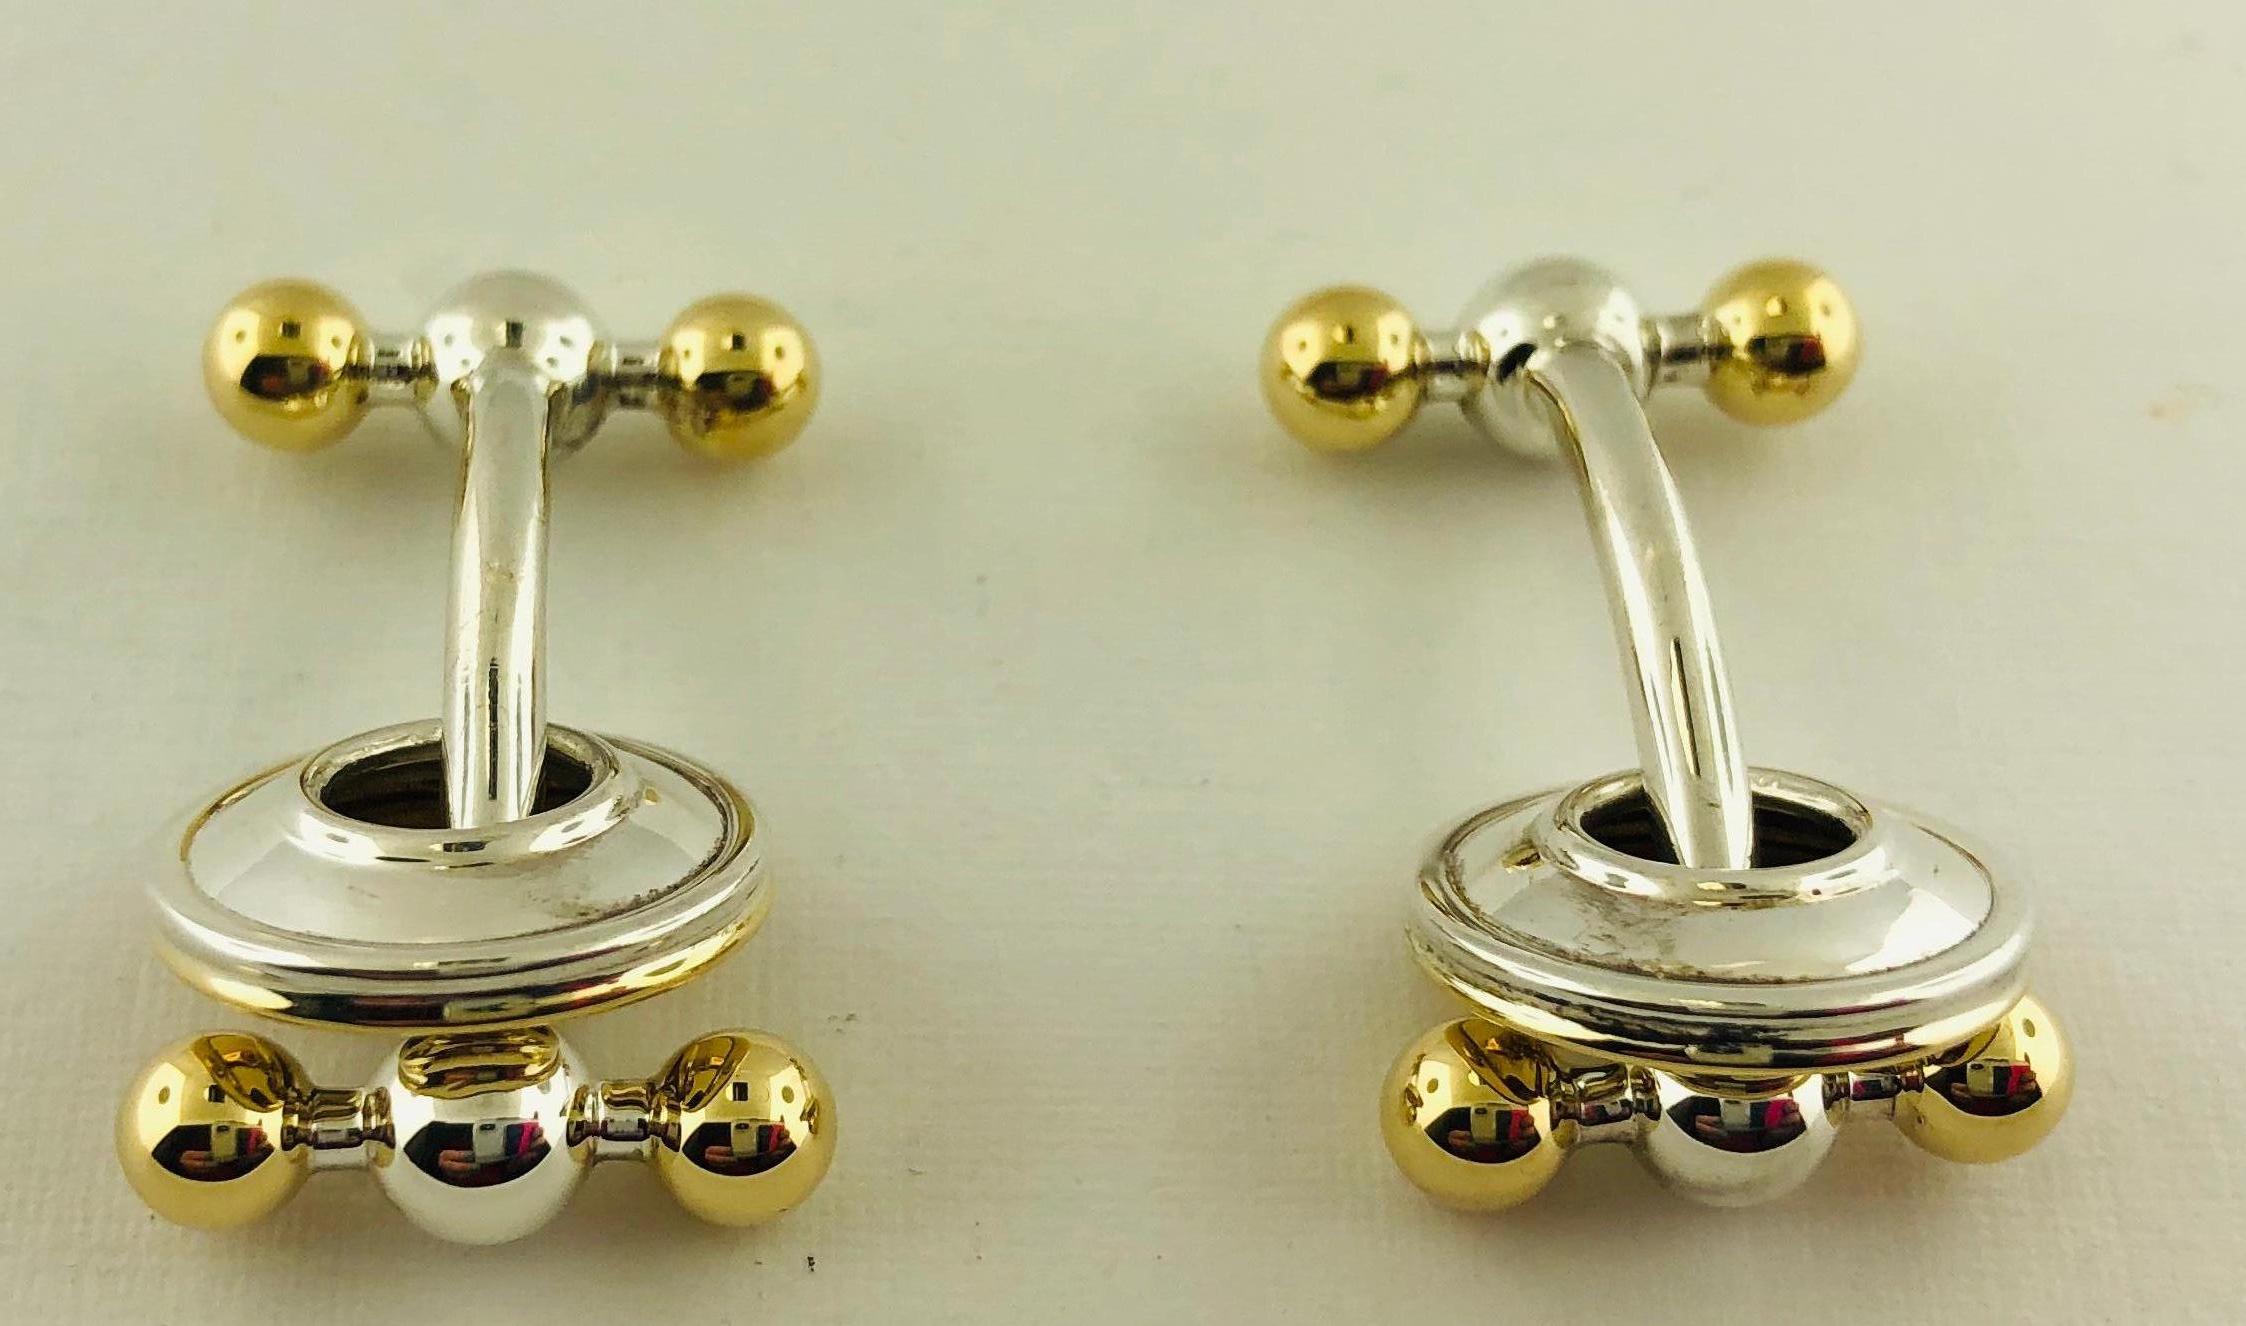 Tiffany & Co Paloma Picasso Modern Cufflinks

18k Yellow gold and Sterling Silver

Stamped 